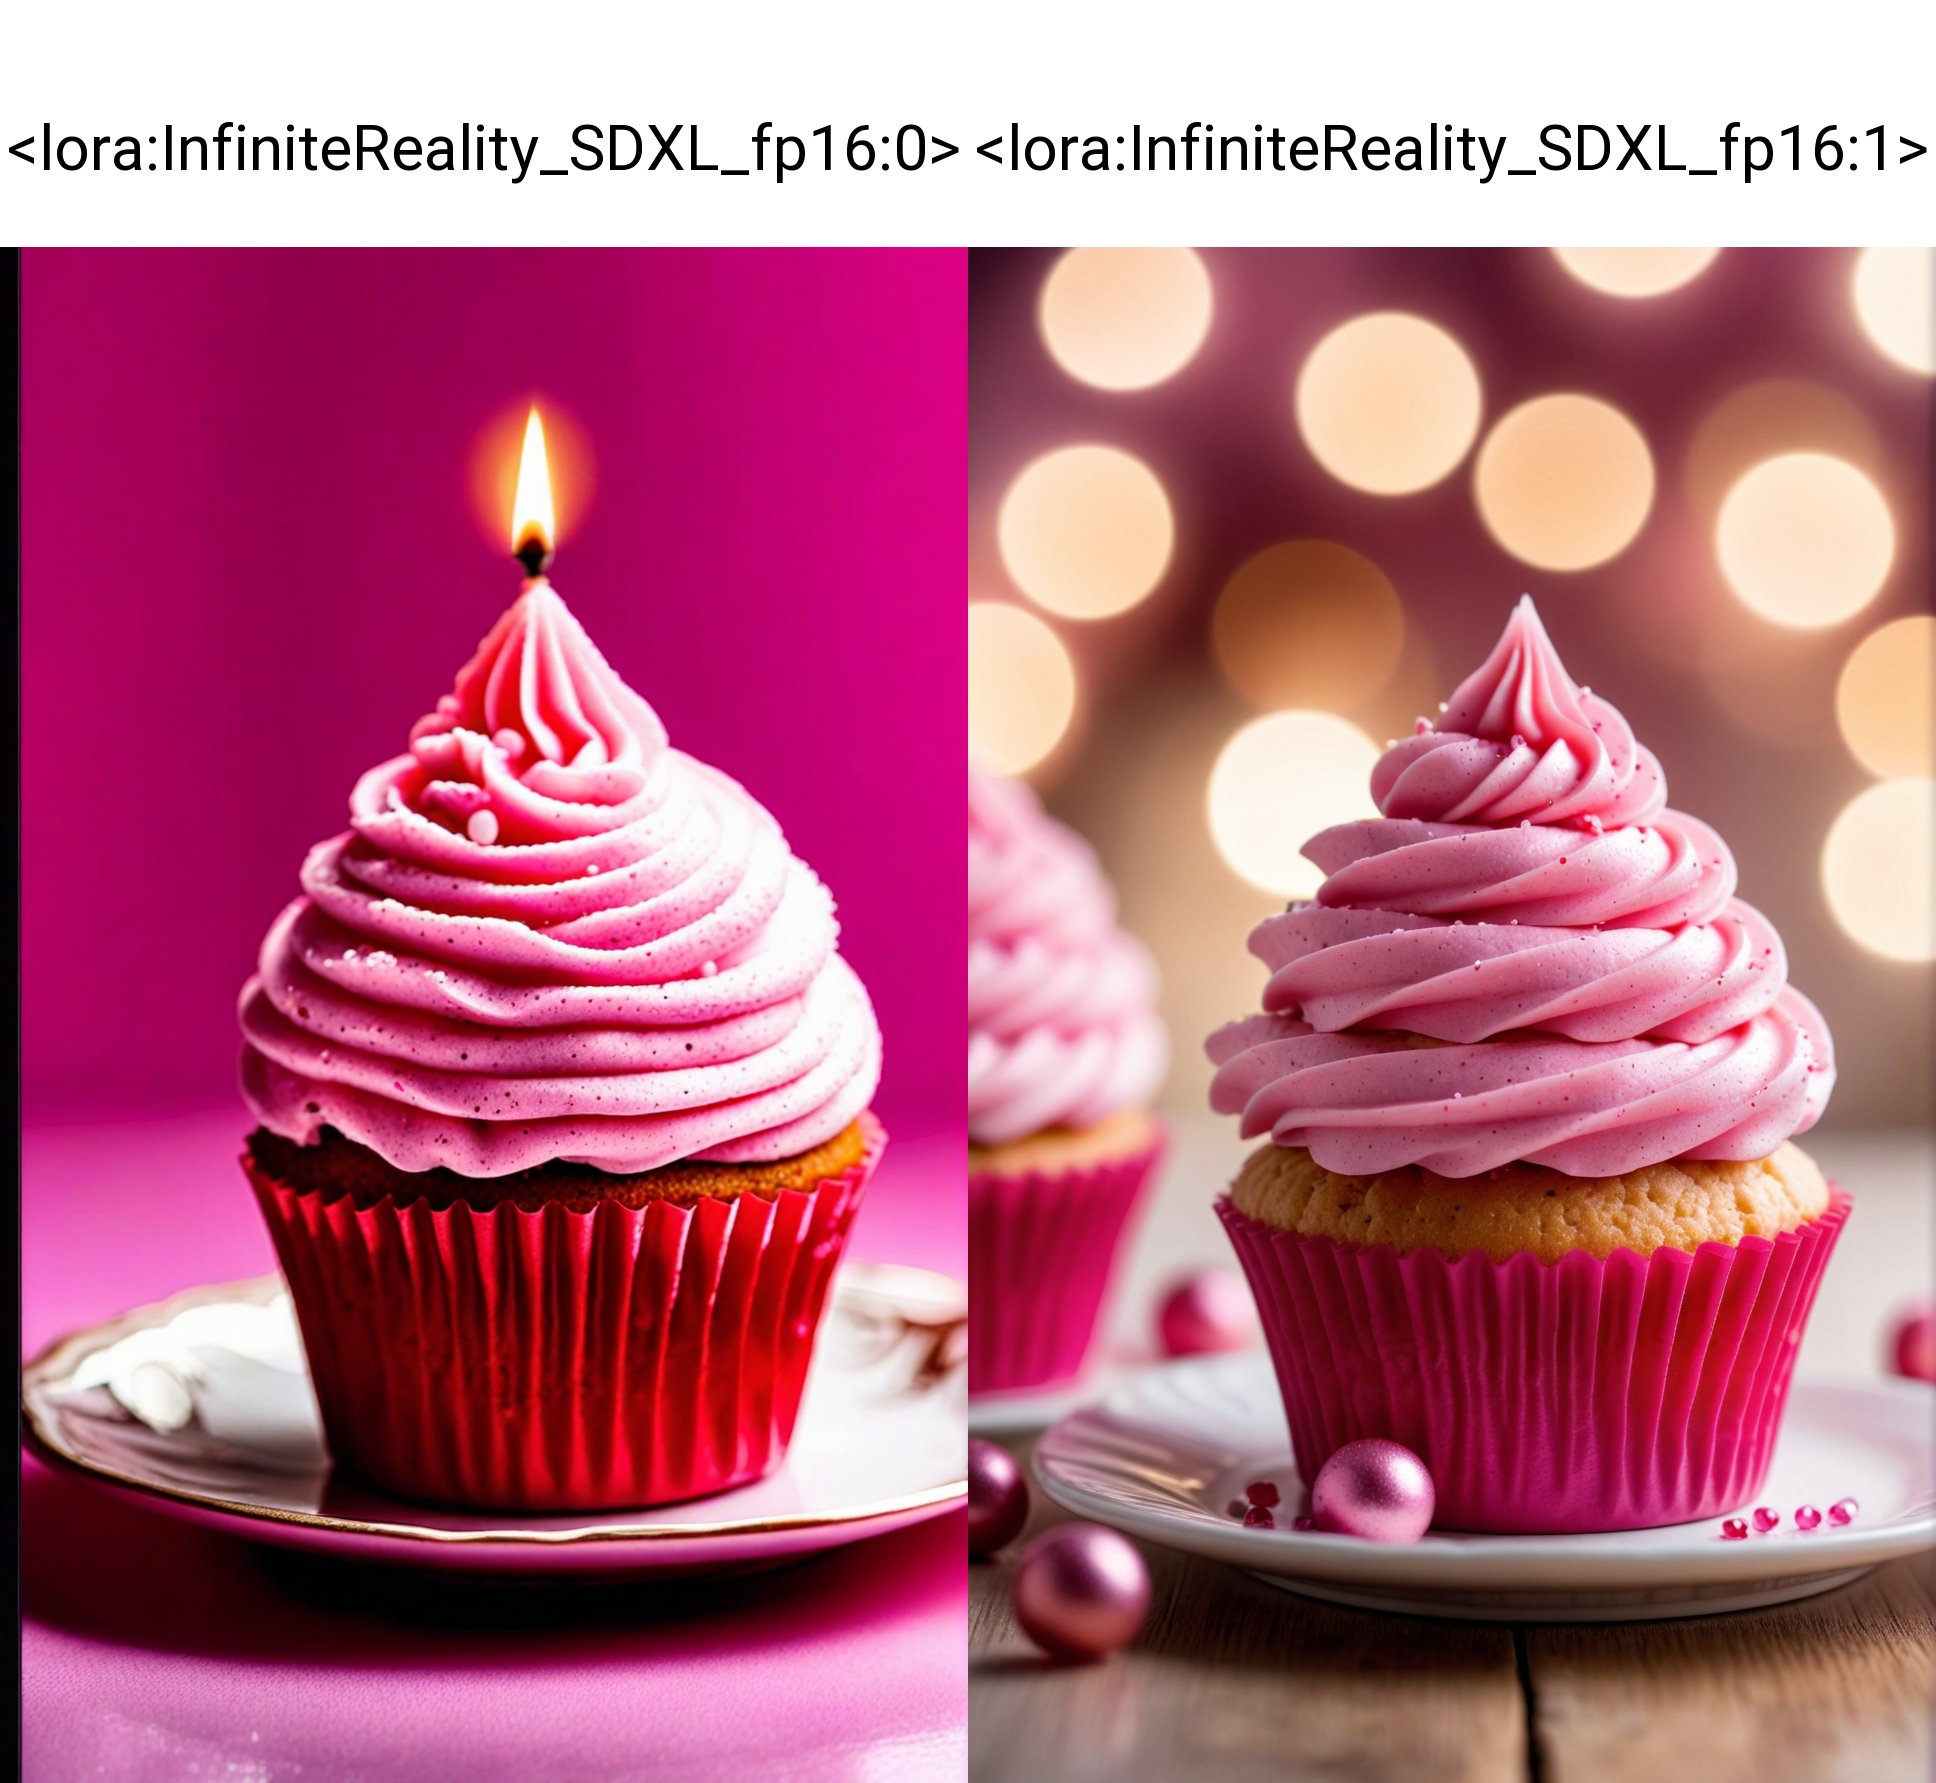 8k, extremely detailed pink cupcake, blur background, photo-realistic still life, Arsenic pomade, gorgon brand, don't use it or it will ruin your skin. Suave Classy Professional Photography, High Quality, High Details, High Resolution, 4K, (Bokeh:2.2), Backlight, Long Exposure:2.5 <lora:InfiniteReality_SDXL_fp16:0>